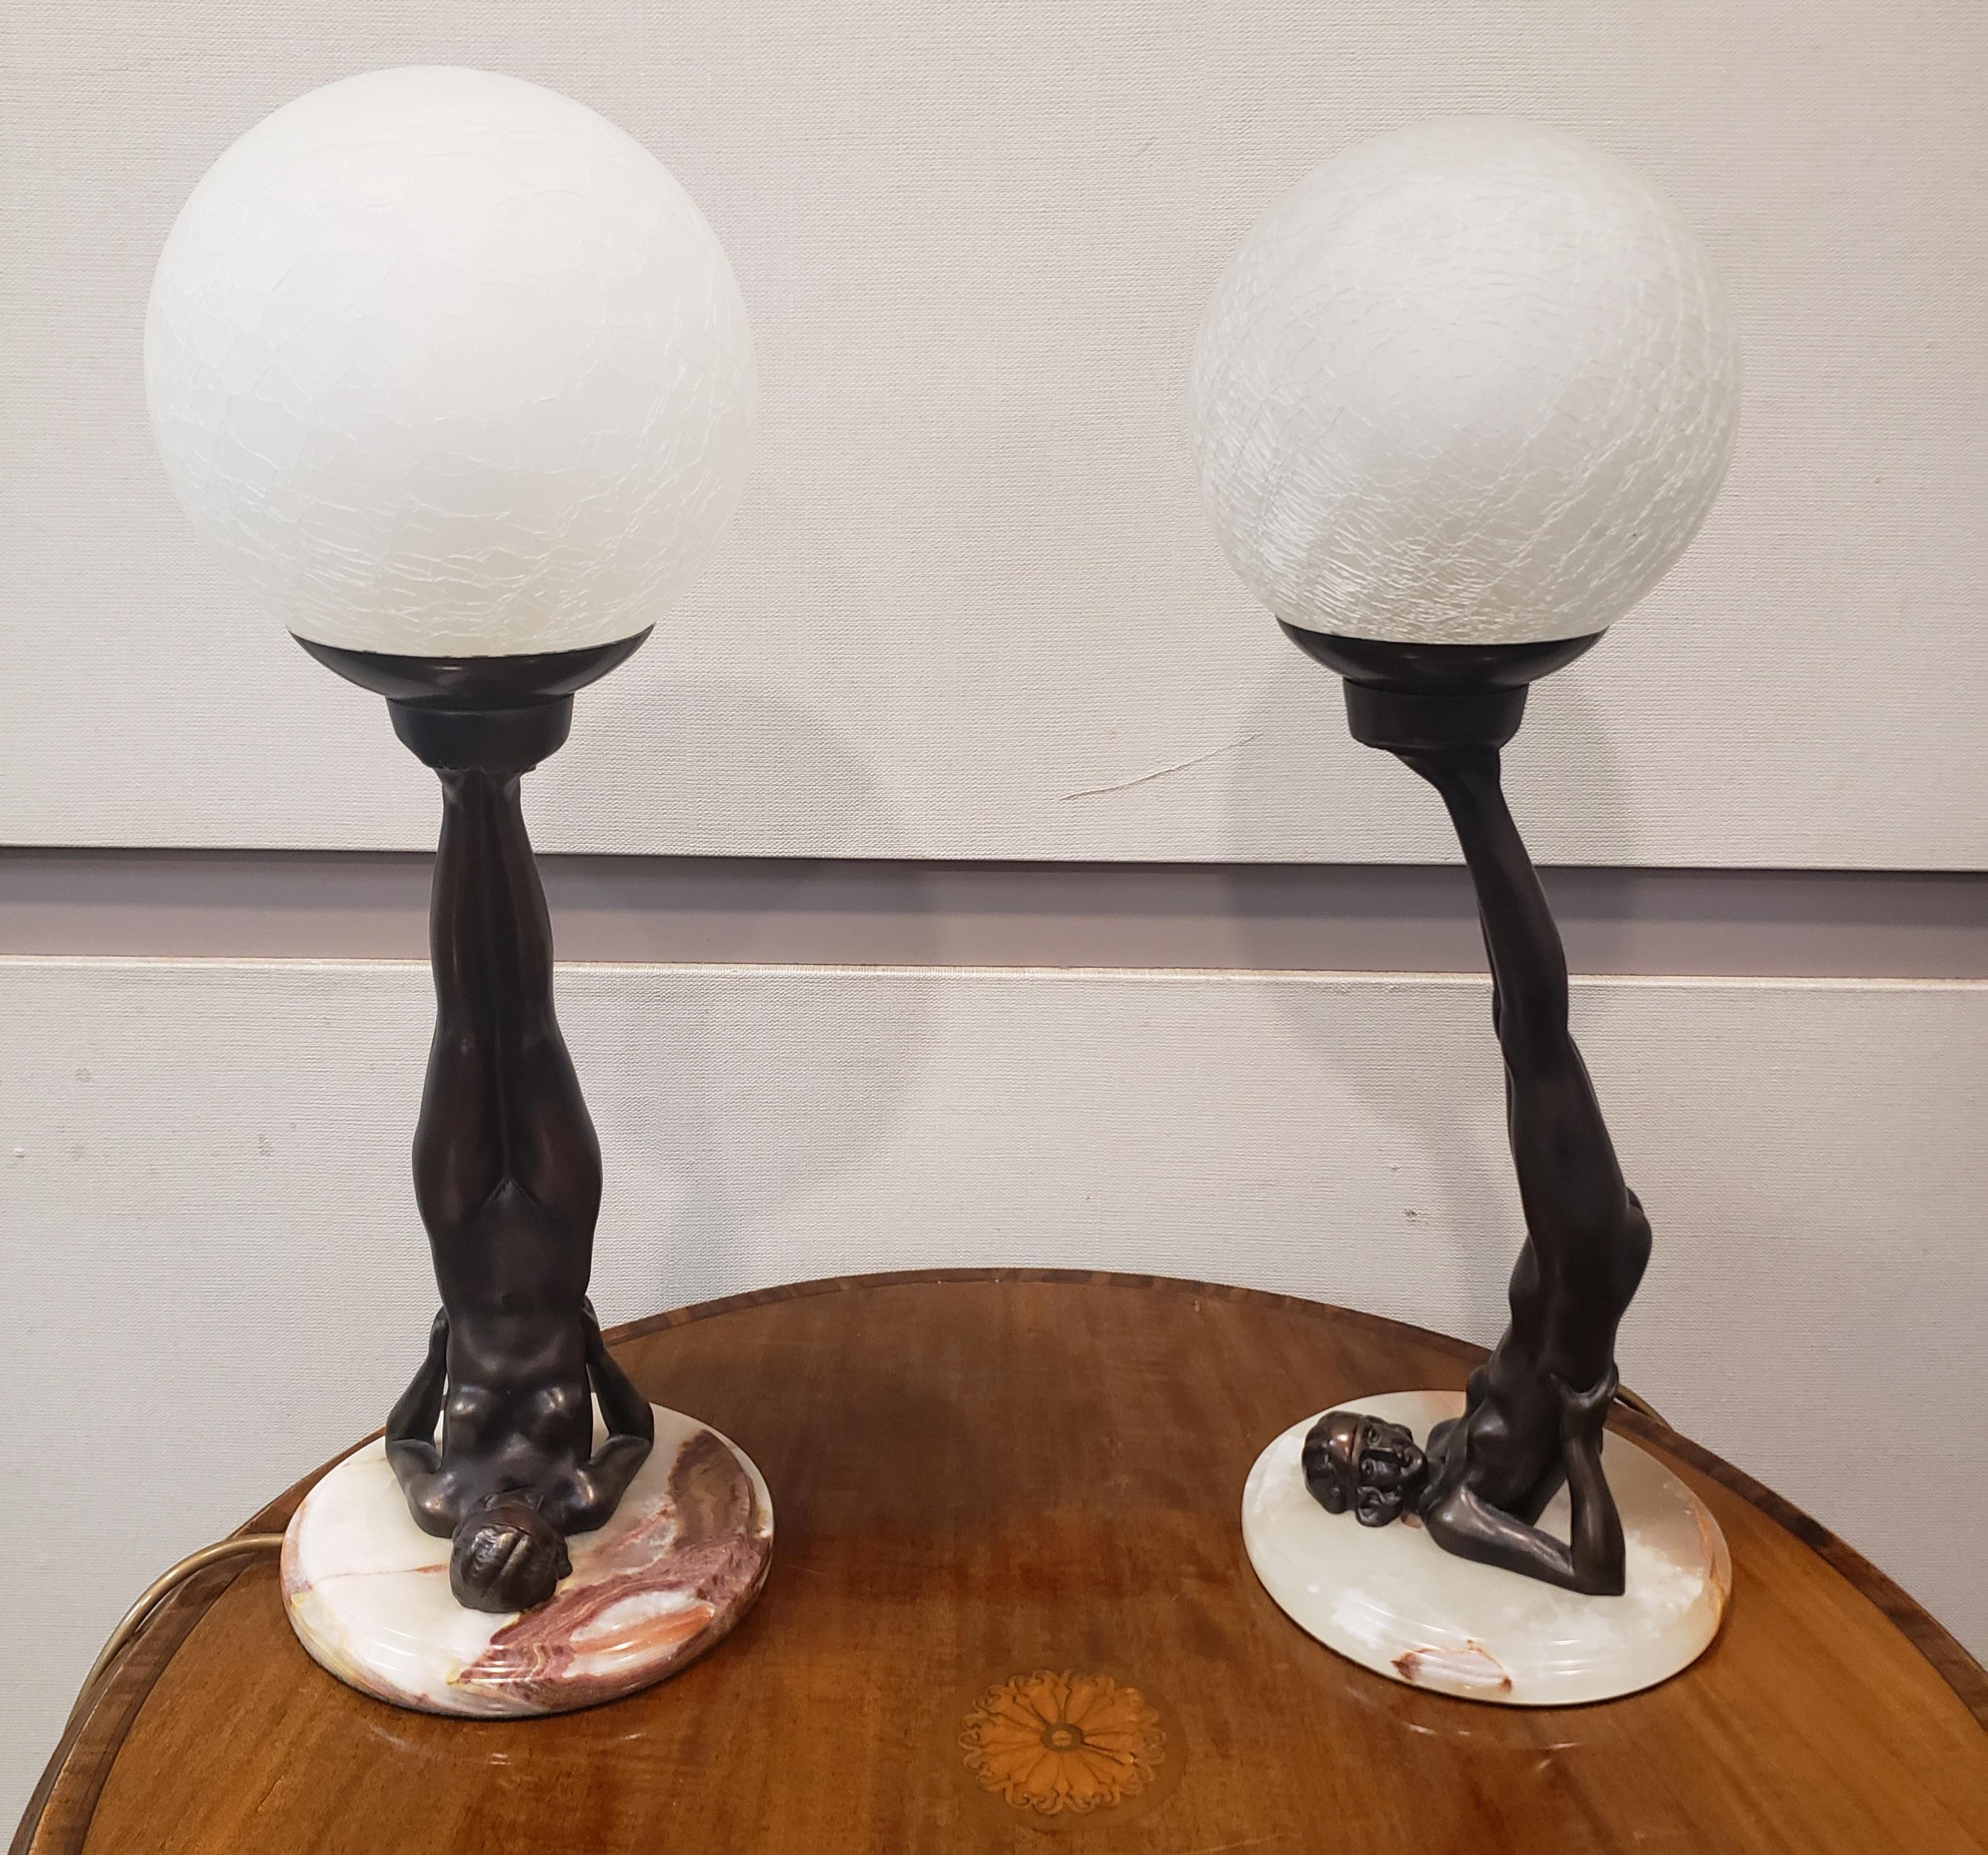 Art Deco Table Lamps with Globe. Rare Reversed Nude. Excellent vintage condition